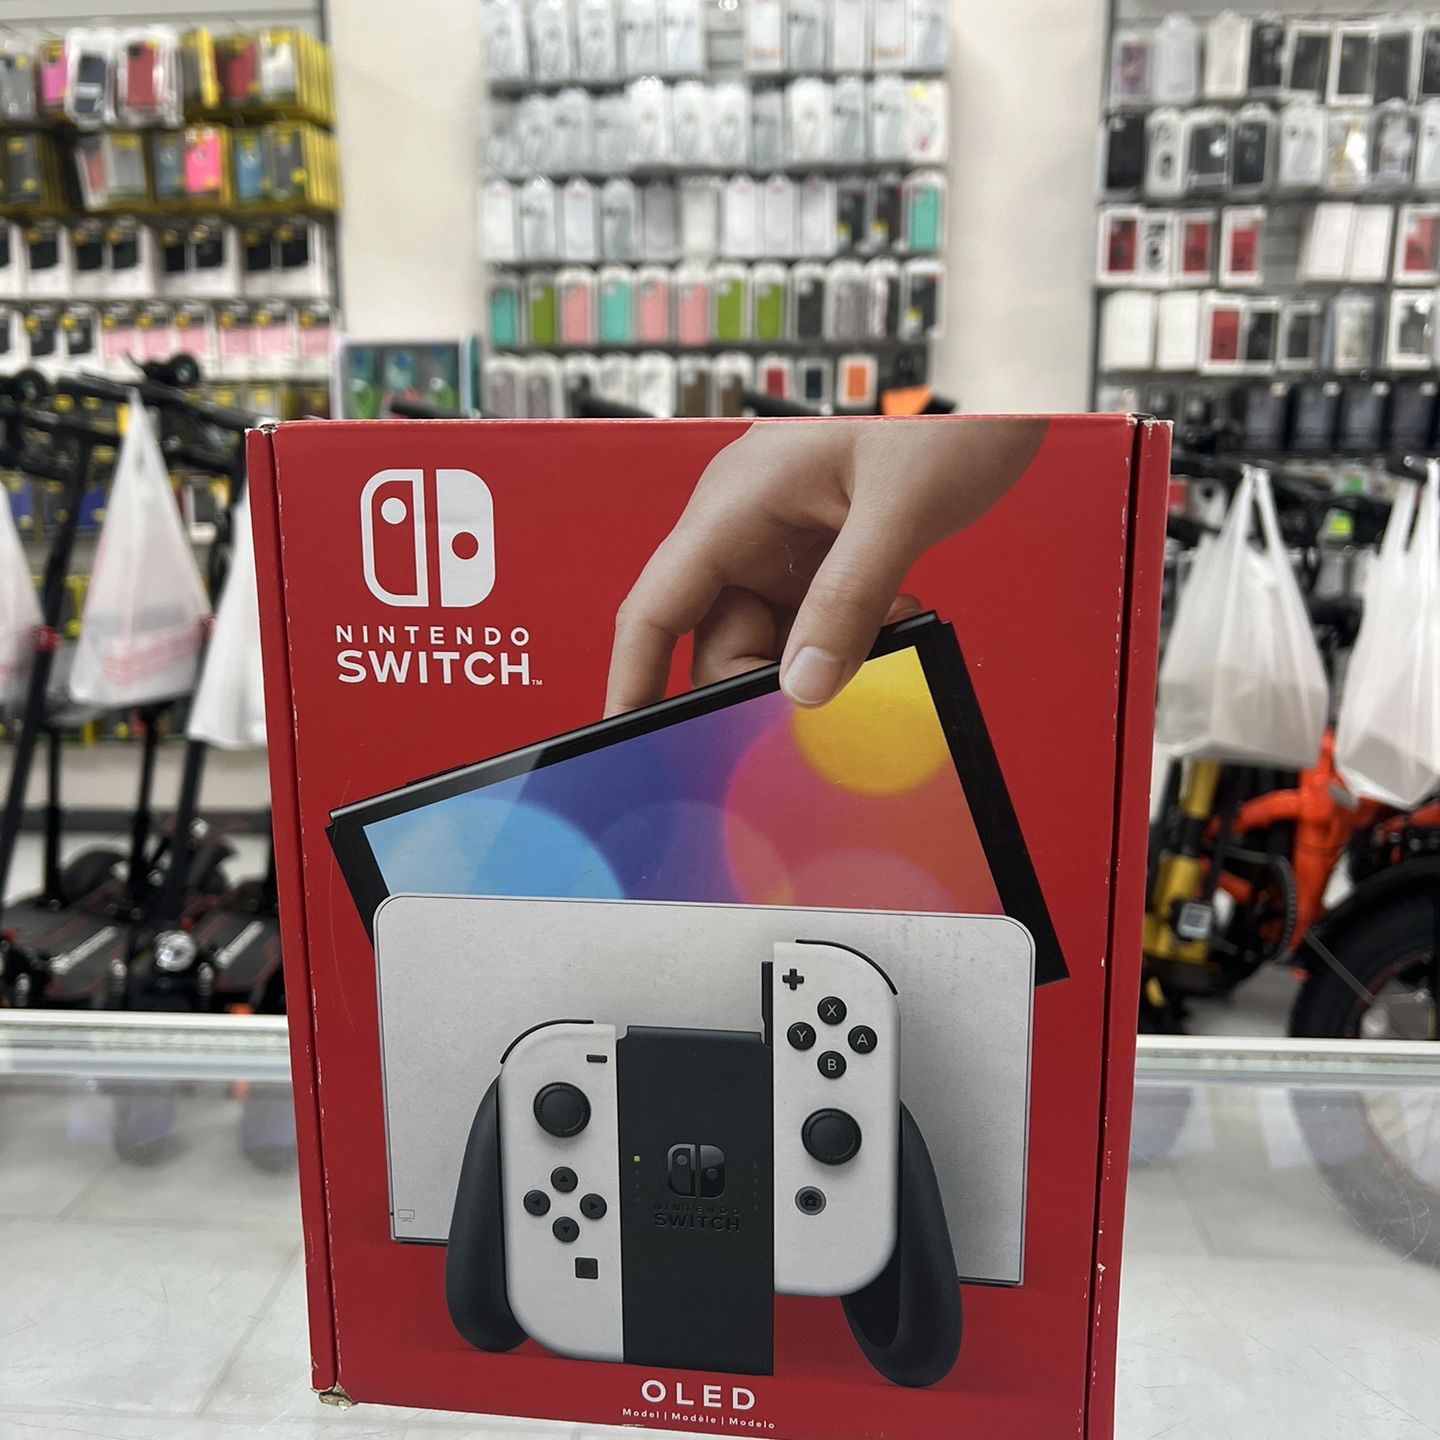 Nintendo Switch OLED Brand New! Finance For $50 Down Payment!!